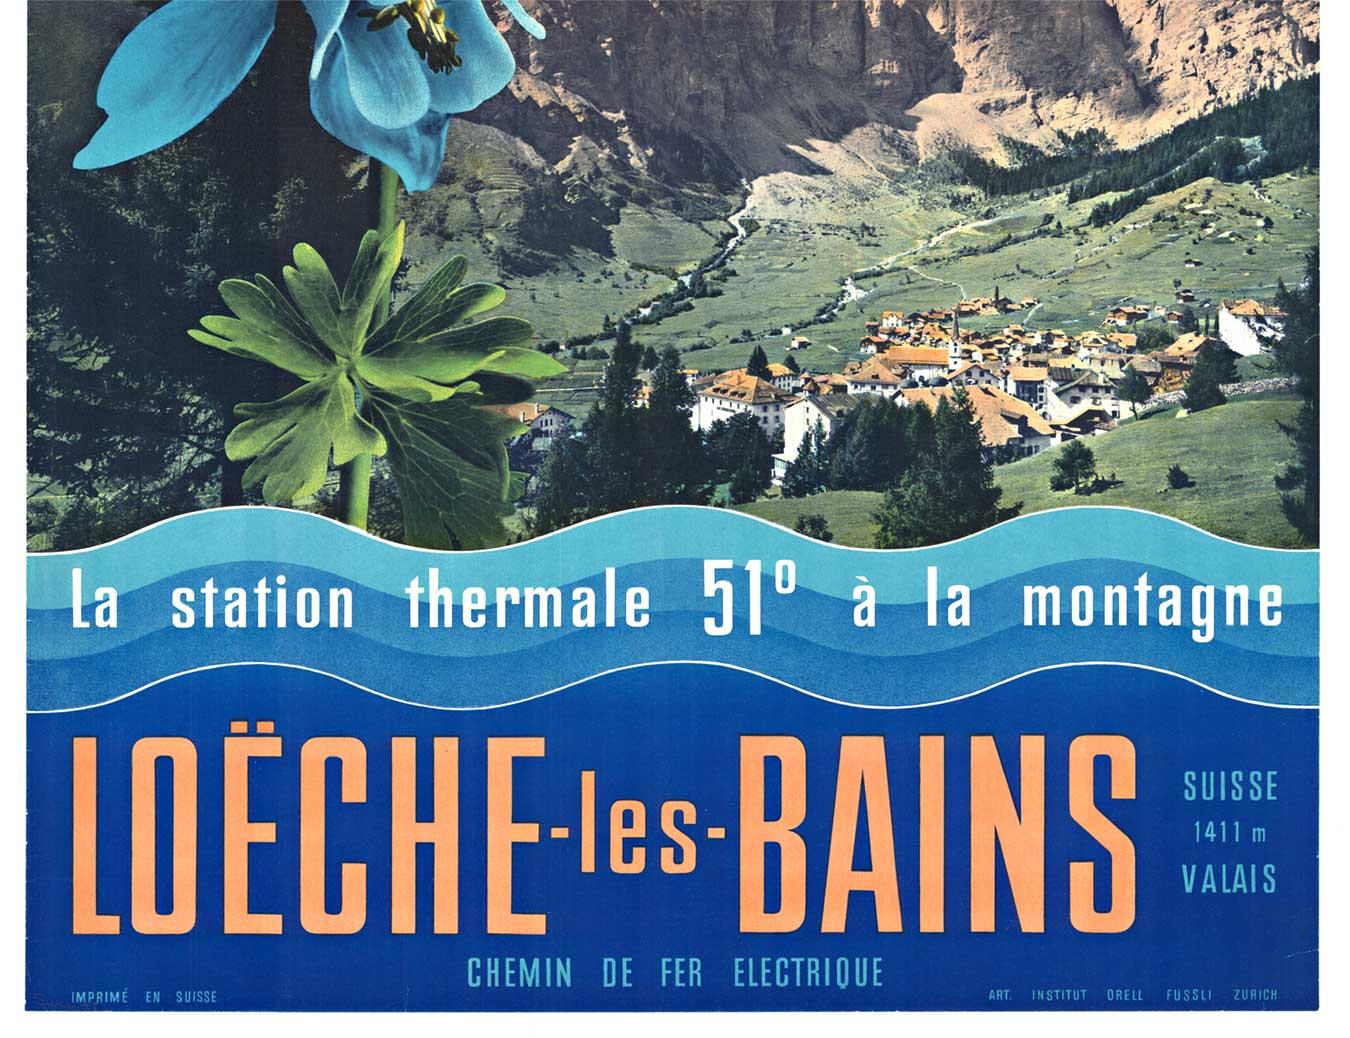 Original Loeche-les-Baines vintage Swiss spa travel poster  a.k.a. Leukerbad - American Modern Print by Unknown